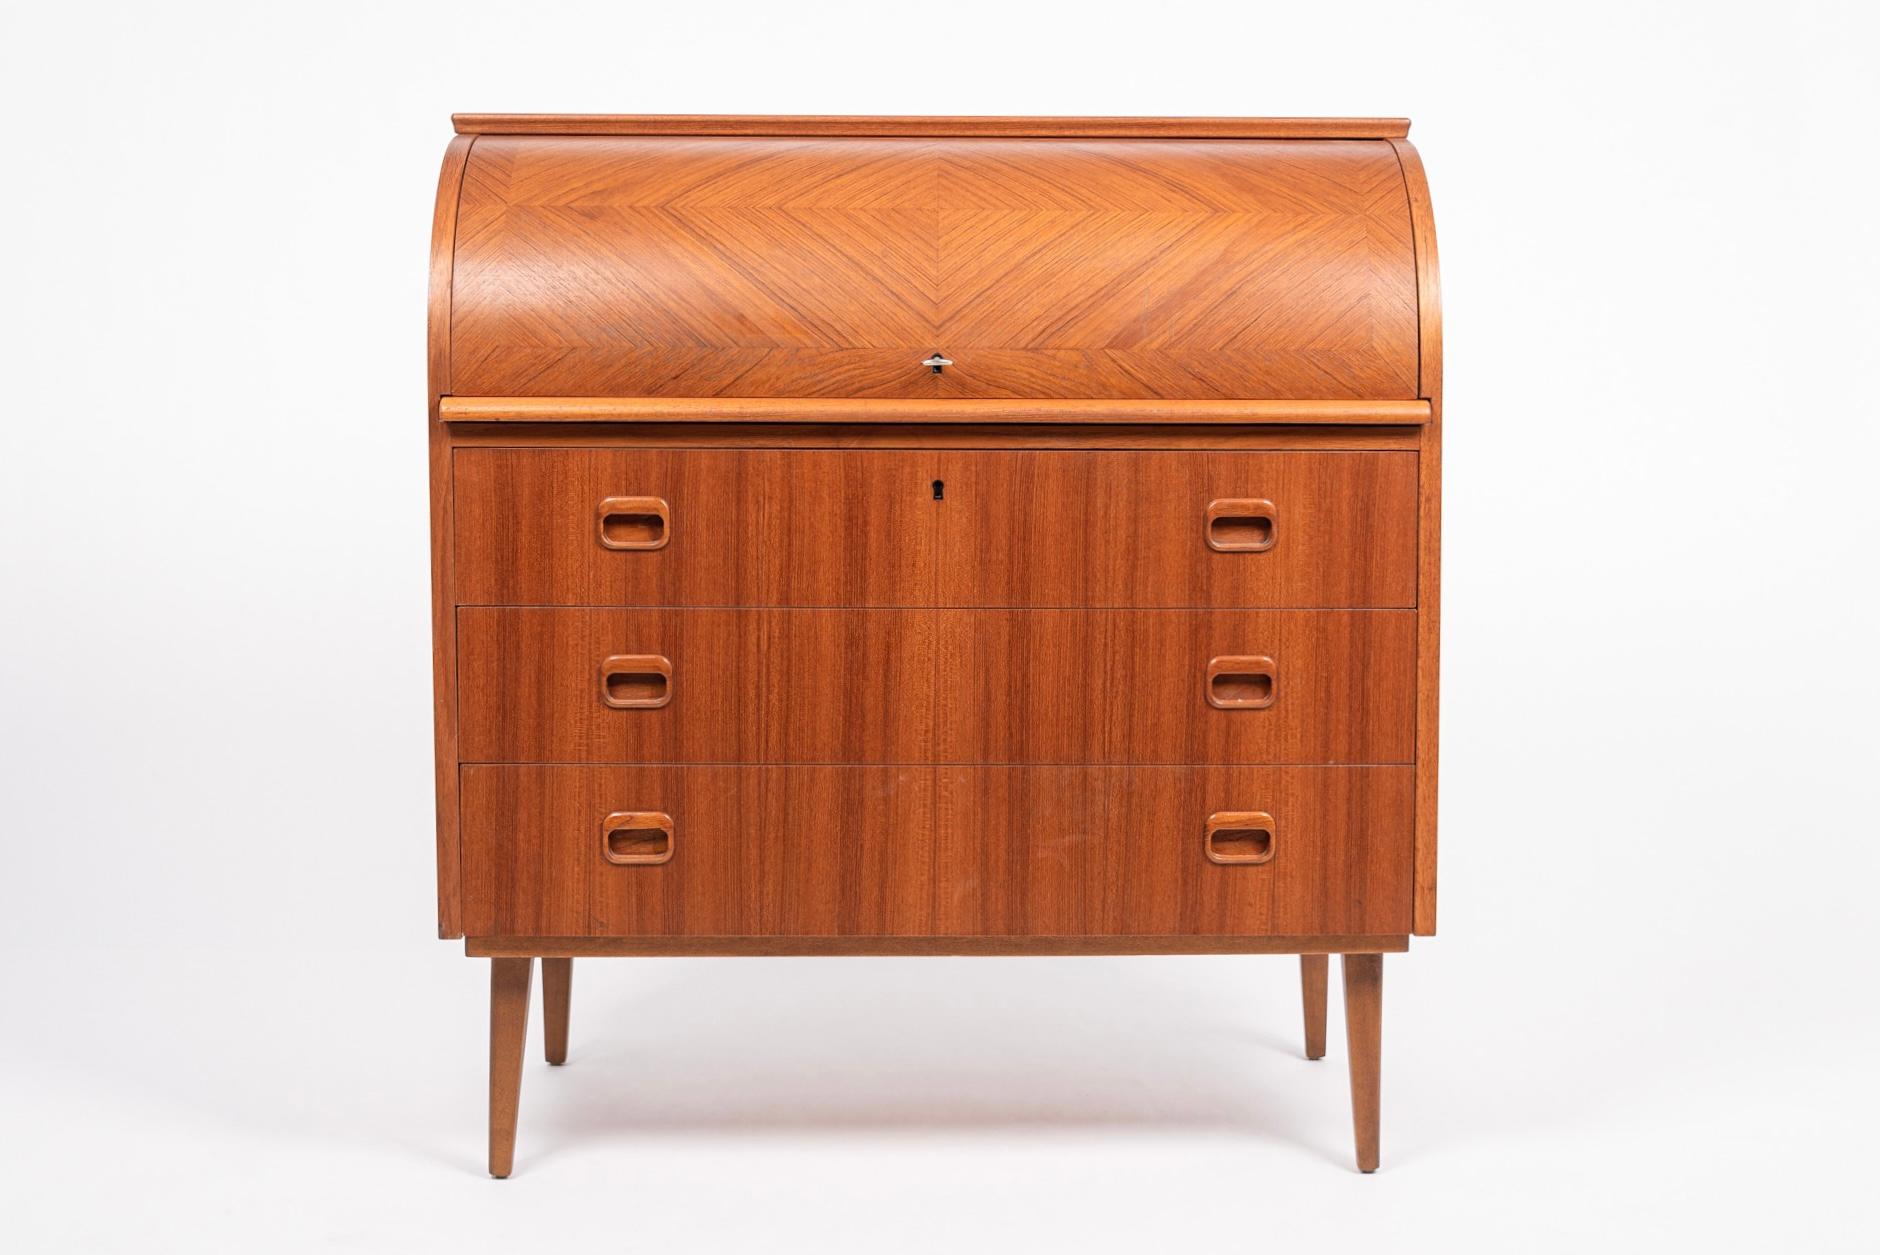 This iconic vintage midcentury Swedish modern Egon Ostergaard teak cylinder rolltop secretary desk cabinet was made in Sweden circa 1960. The Classic Scandinavian Modern design has clean, Minimalist lines and gentle curves. The teak wood finish is a